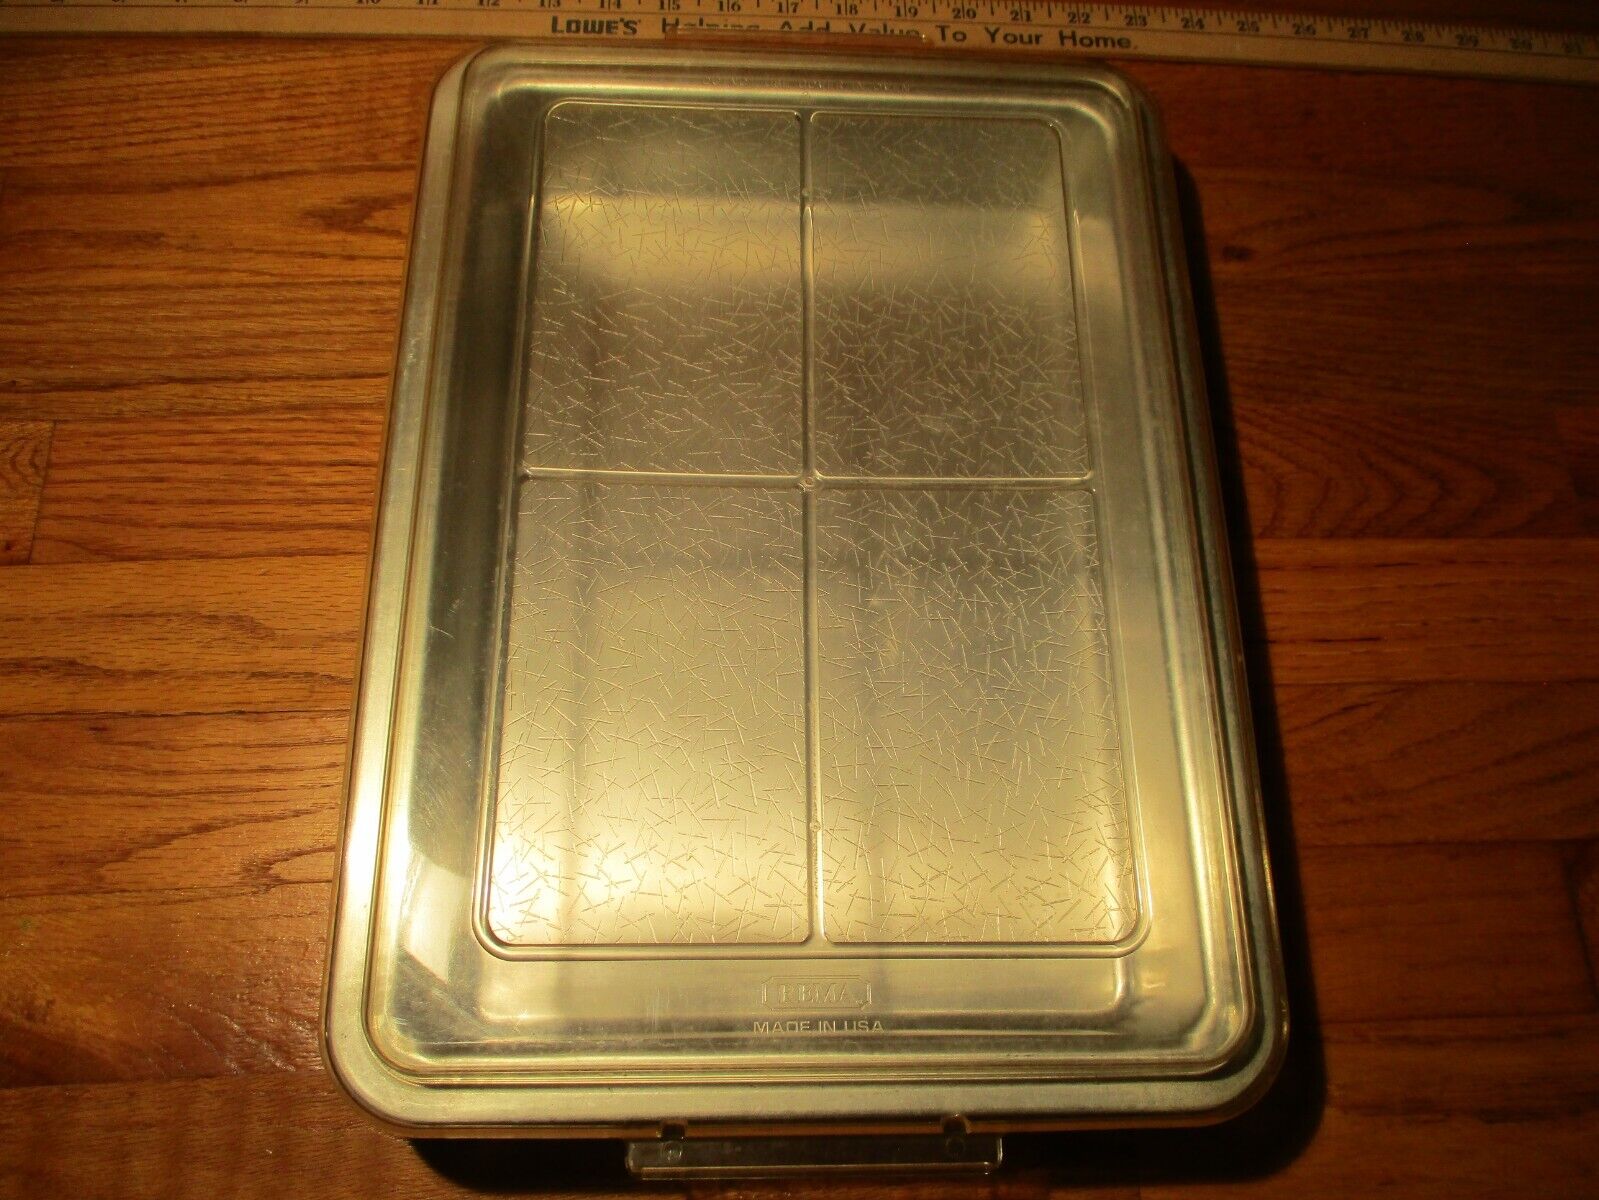 Vintage Rema Air Bake Double Wall Insulated Aluminum 13x9 Baking Pan with Lid